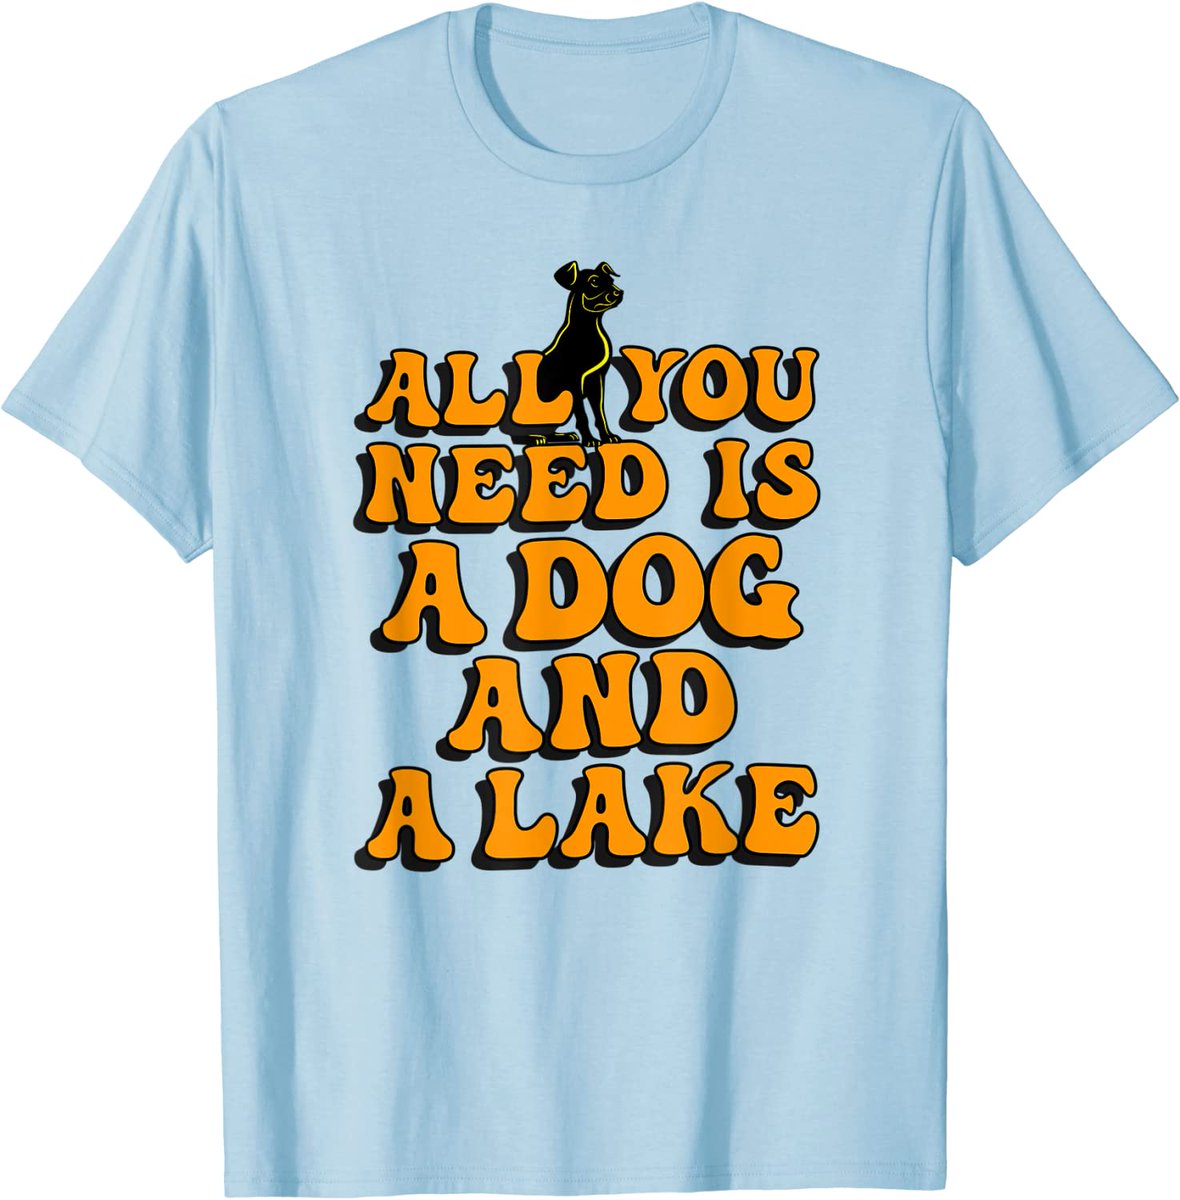 I needt tbis T-shhirt:
New Design for Dogs and Lakes
Click on The Link: bit.ly/3mPQjbG
#shirts #Outerwear #professional #casualwear #Flannel #clothing #clothes #giftforhim #giftideas #flannelshirt #flannel #boyfriendshirt #flannelmurah #kemejamurah #flanneleightyeight